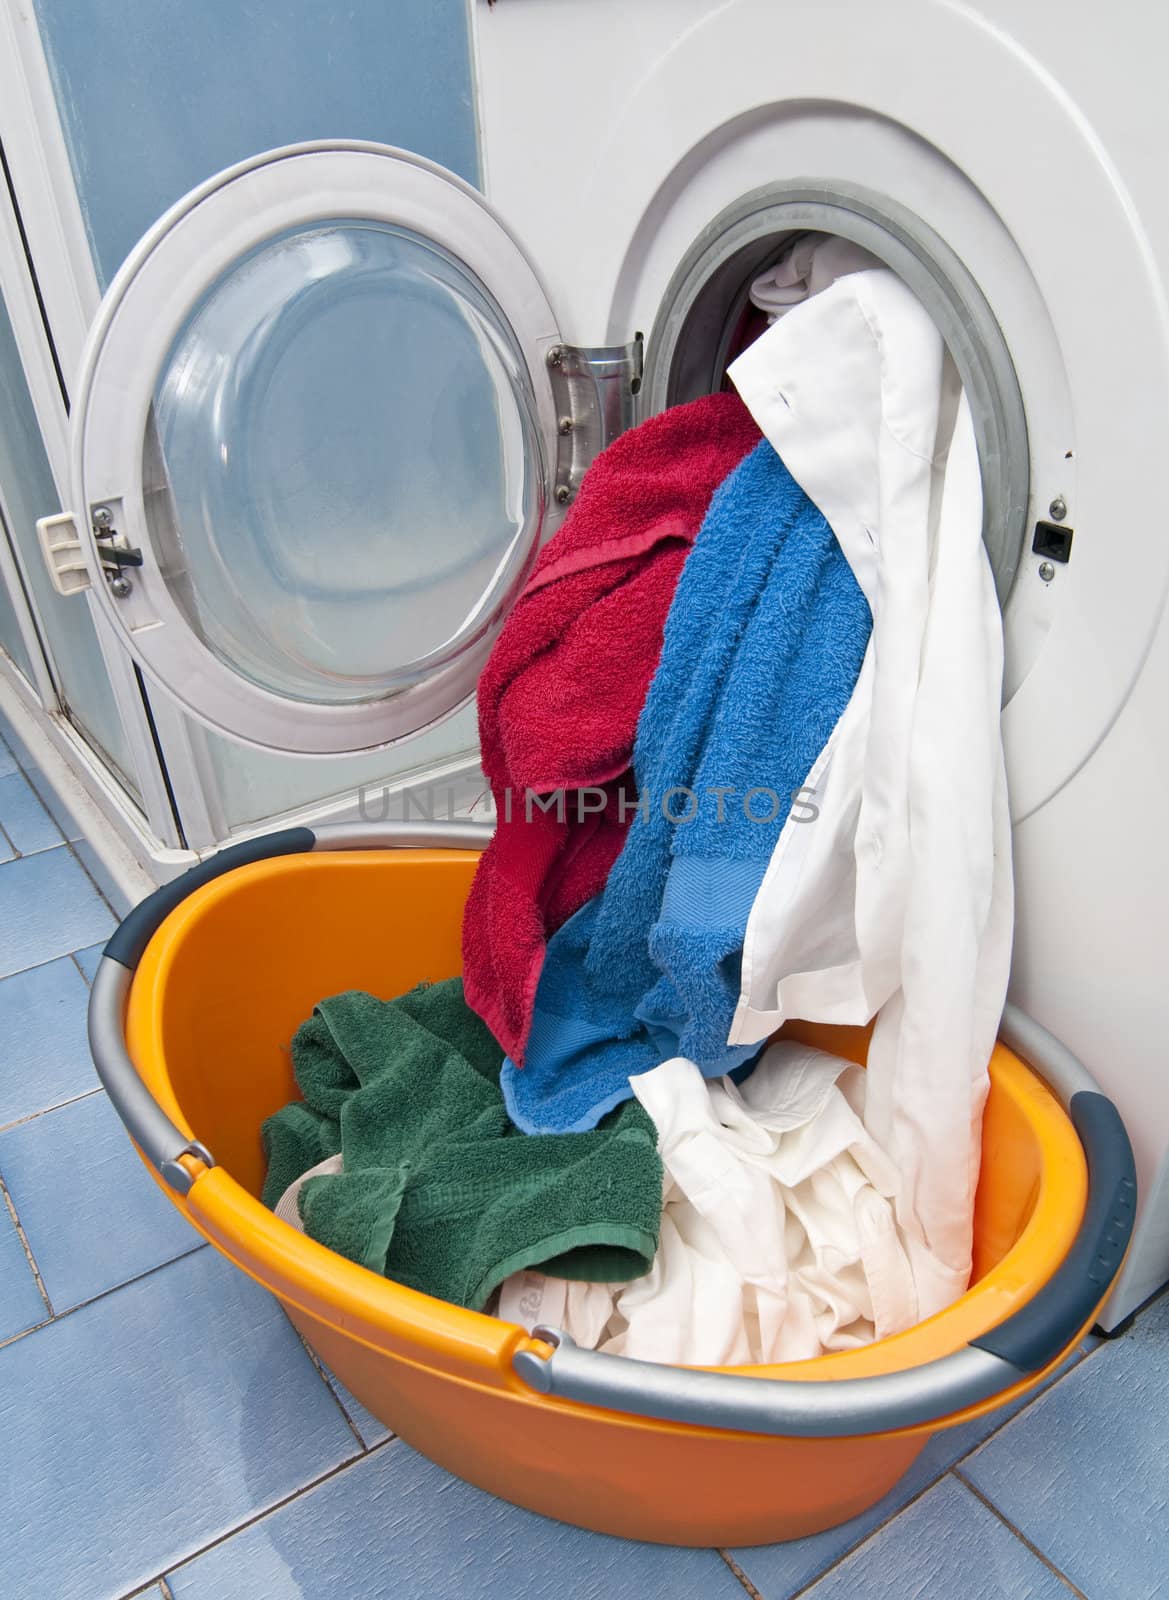 Open Washing machine with white, green, red and blue cloths